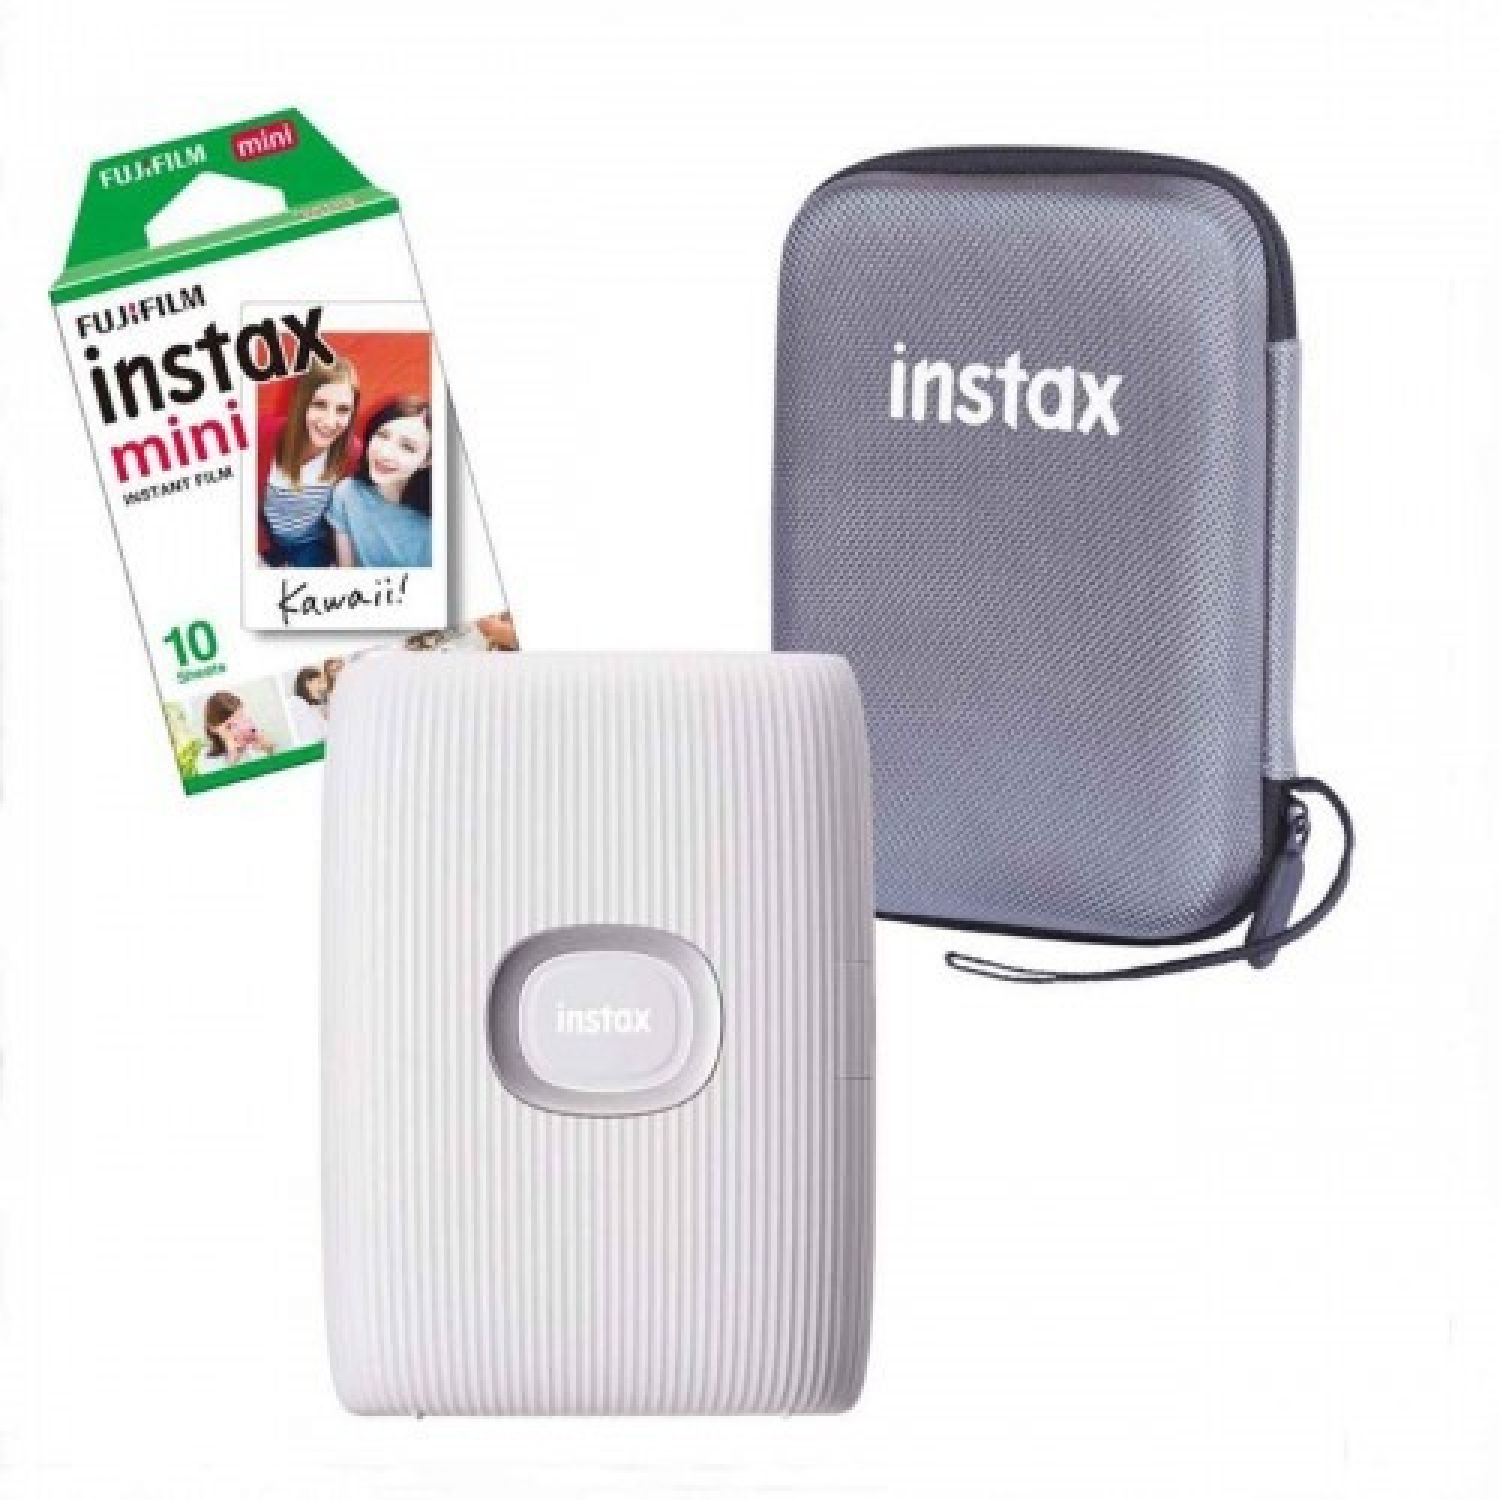 Fujifilm Instax Mini Link 2 Smartphone Photo Printer, Wireless, Portable,  and Lightweight Instant Film Printer, Bluetooth, Compatible on iPhone iOS  or